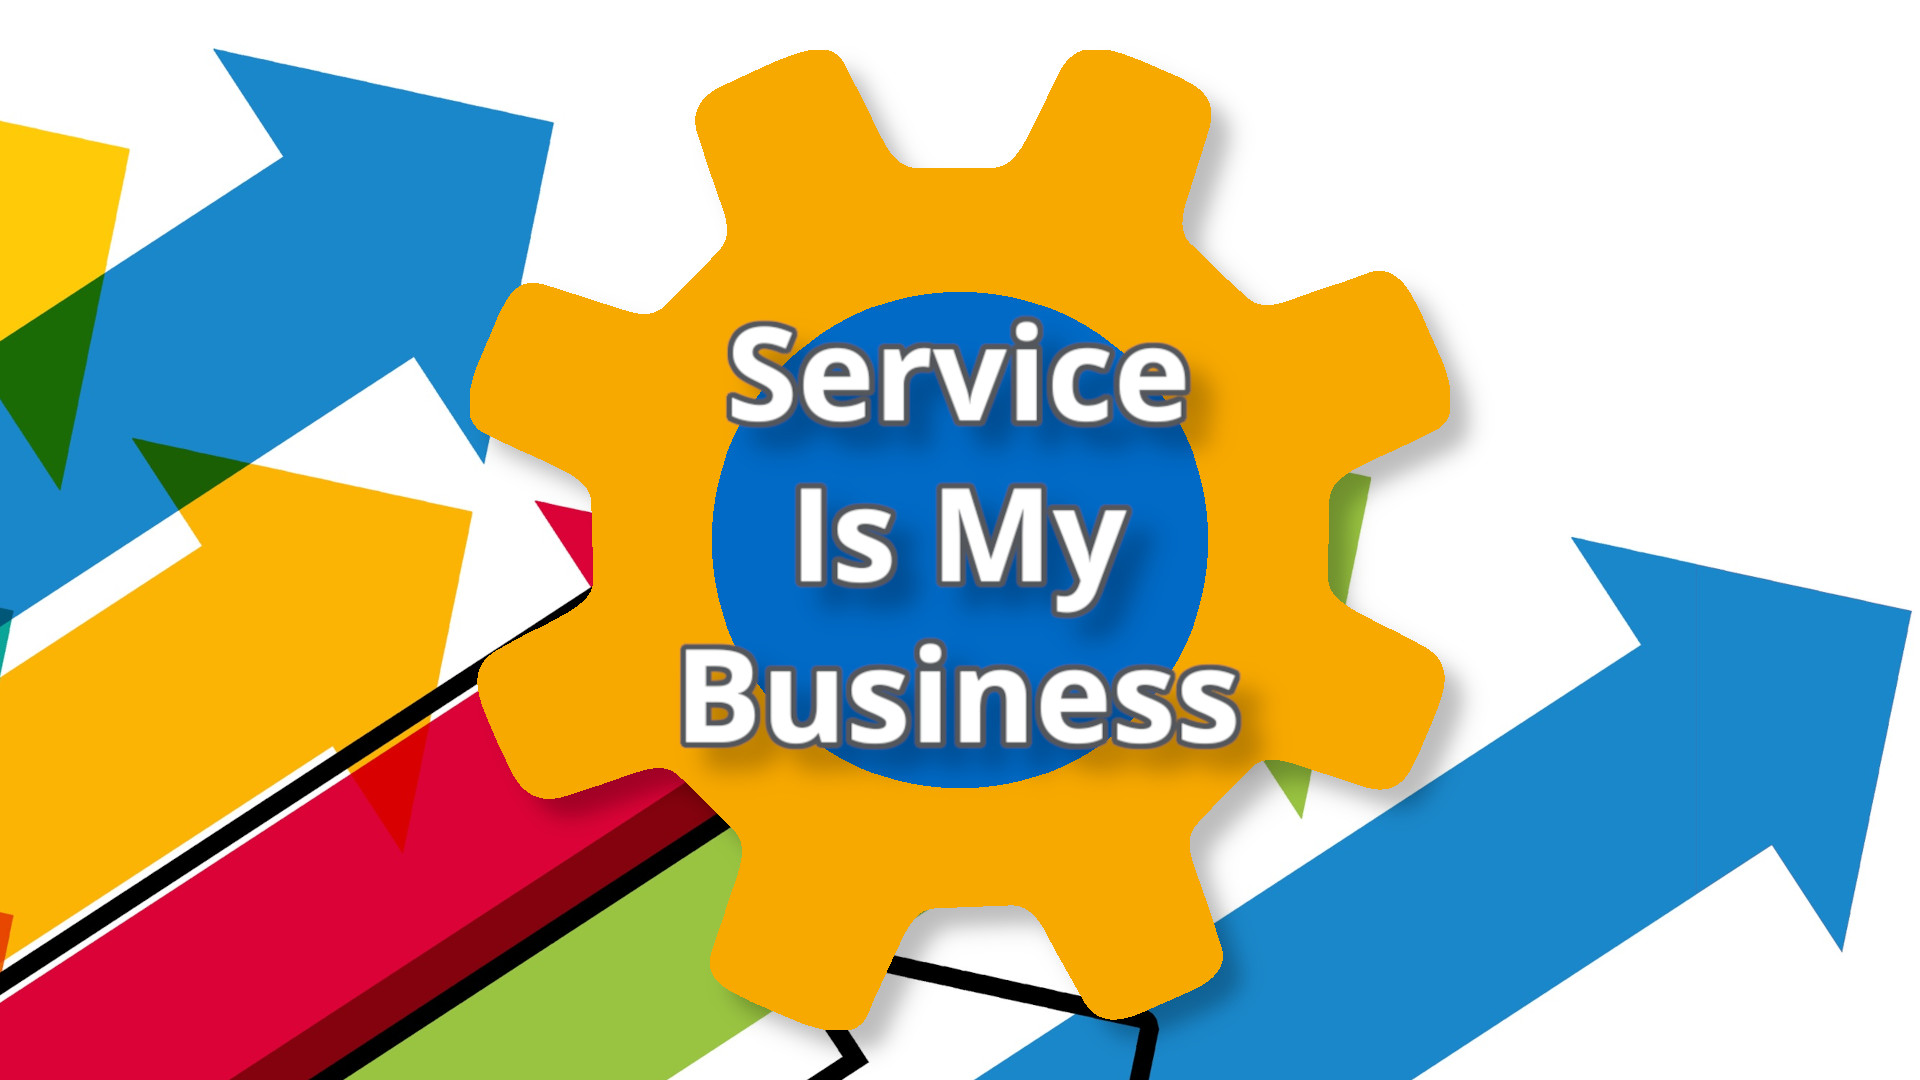 Service Is My Business - Indianapolis East Rotary Club